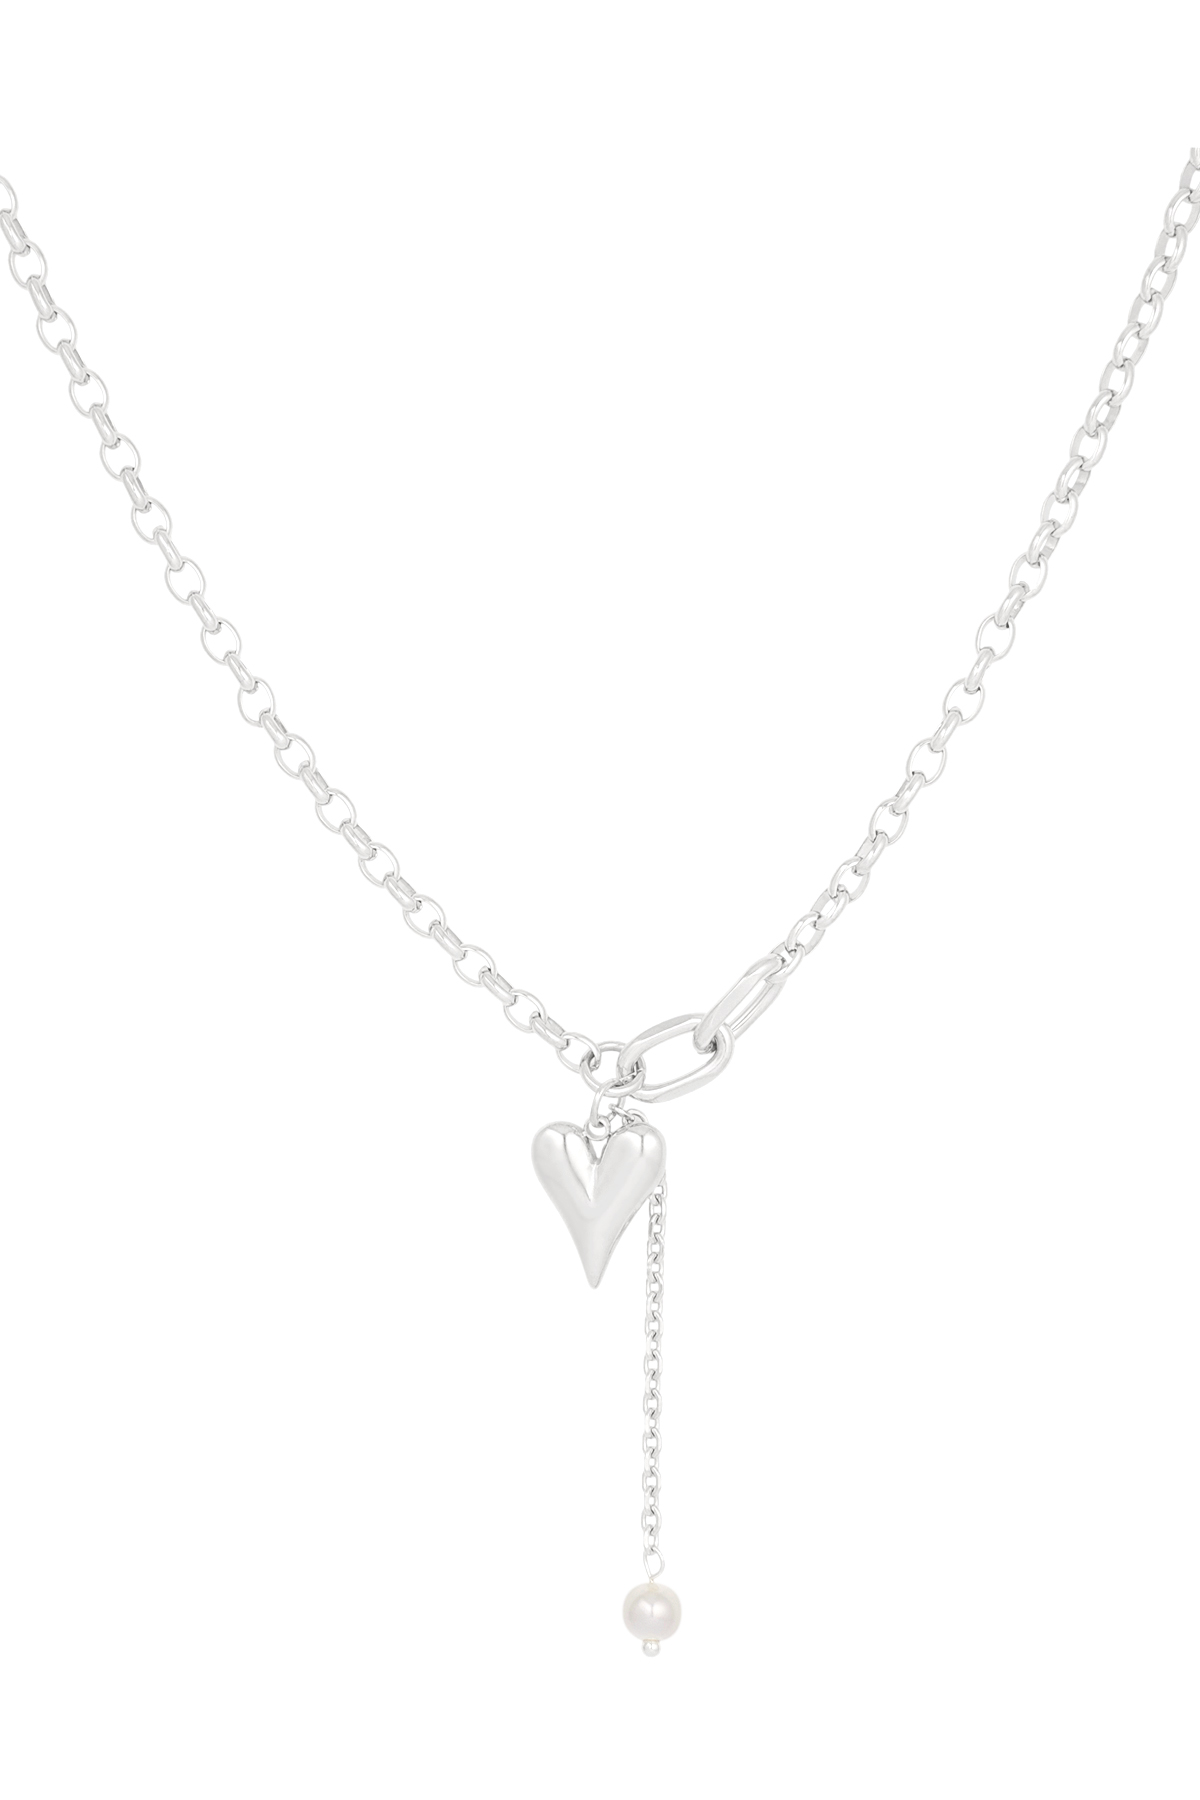 Ketting lovely hearts - zilver 